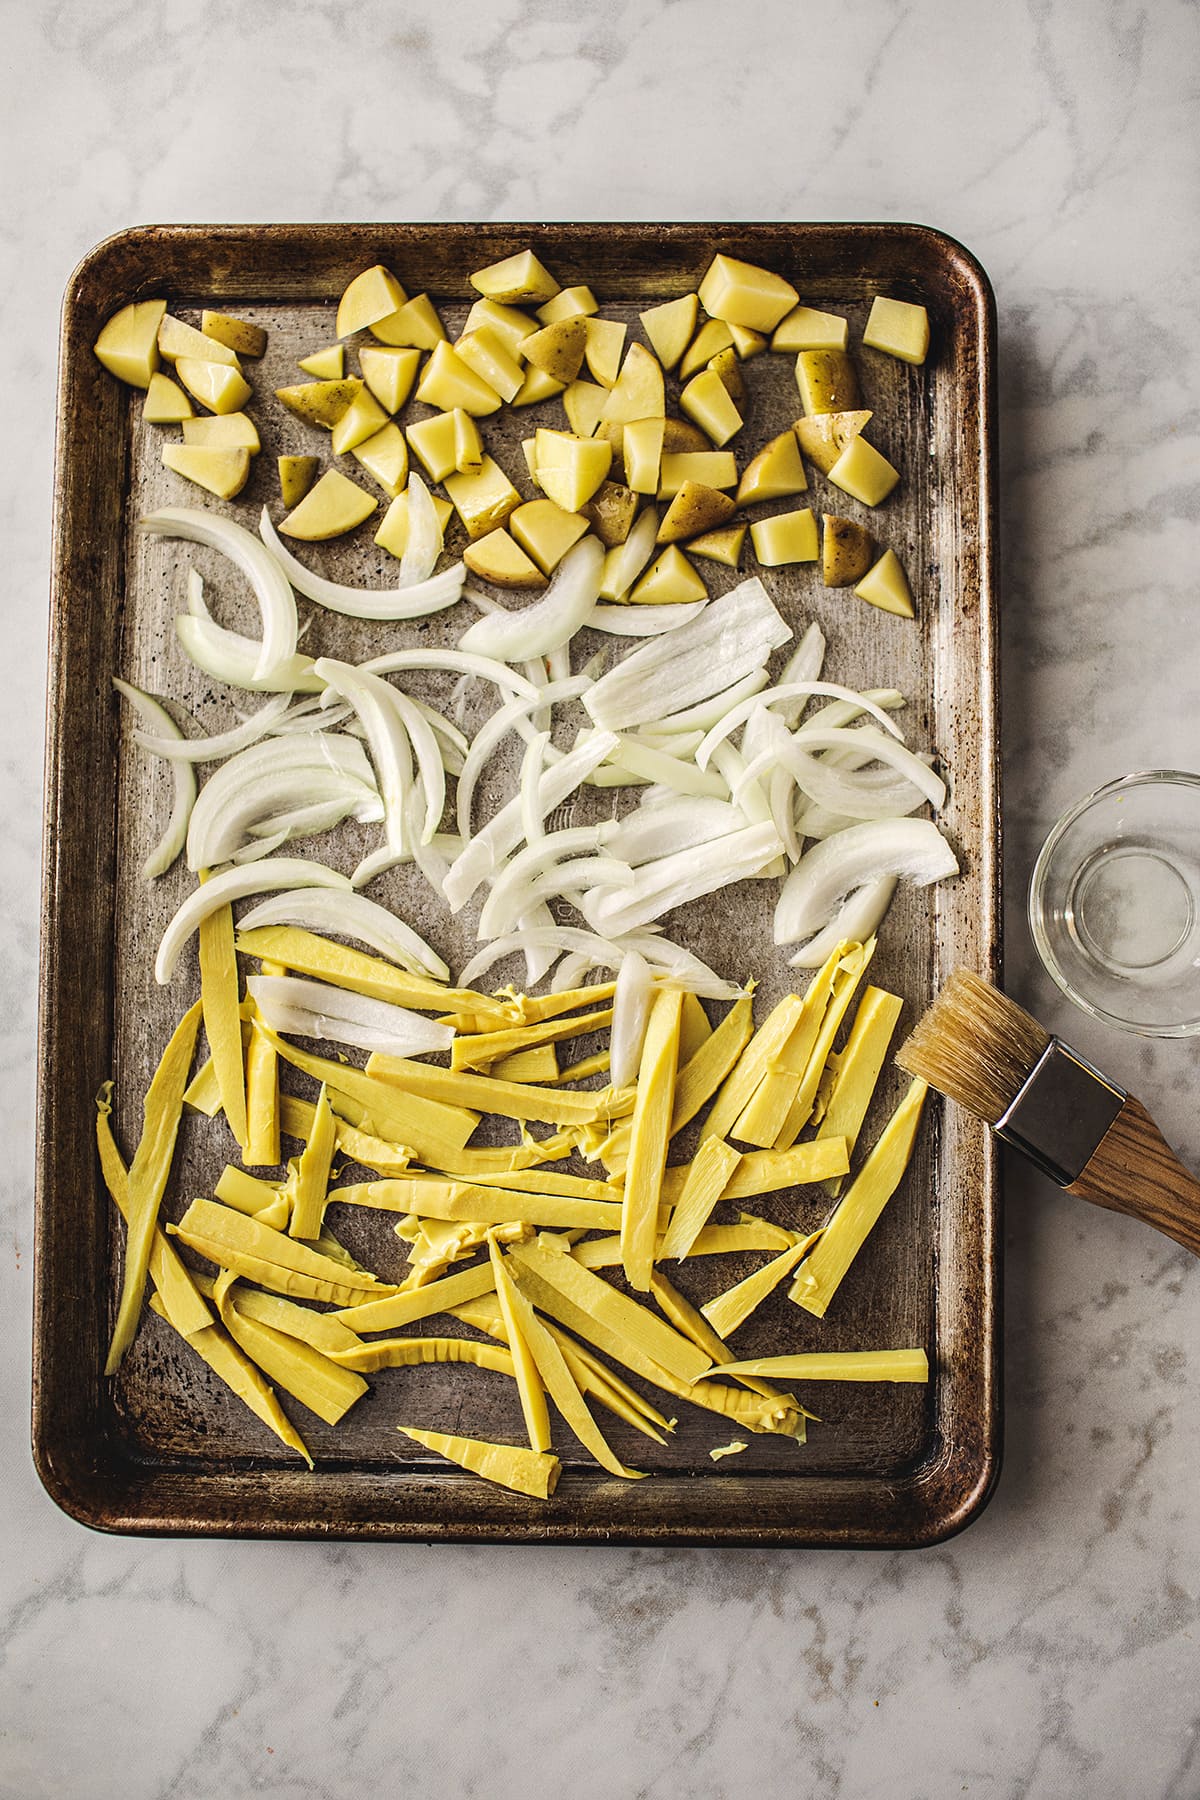 bamboo shoots, potatoes and onions in baking pan